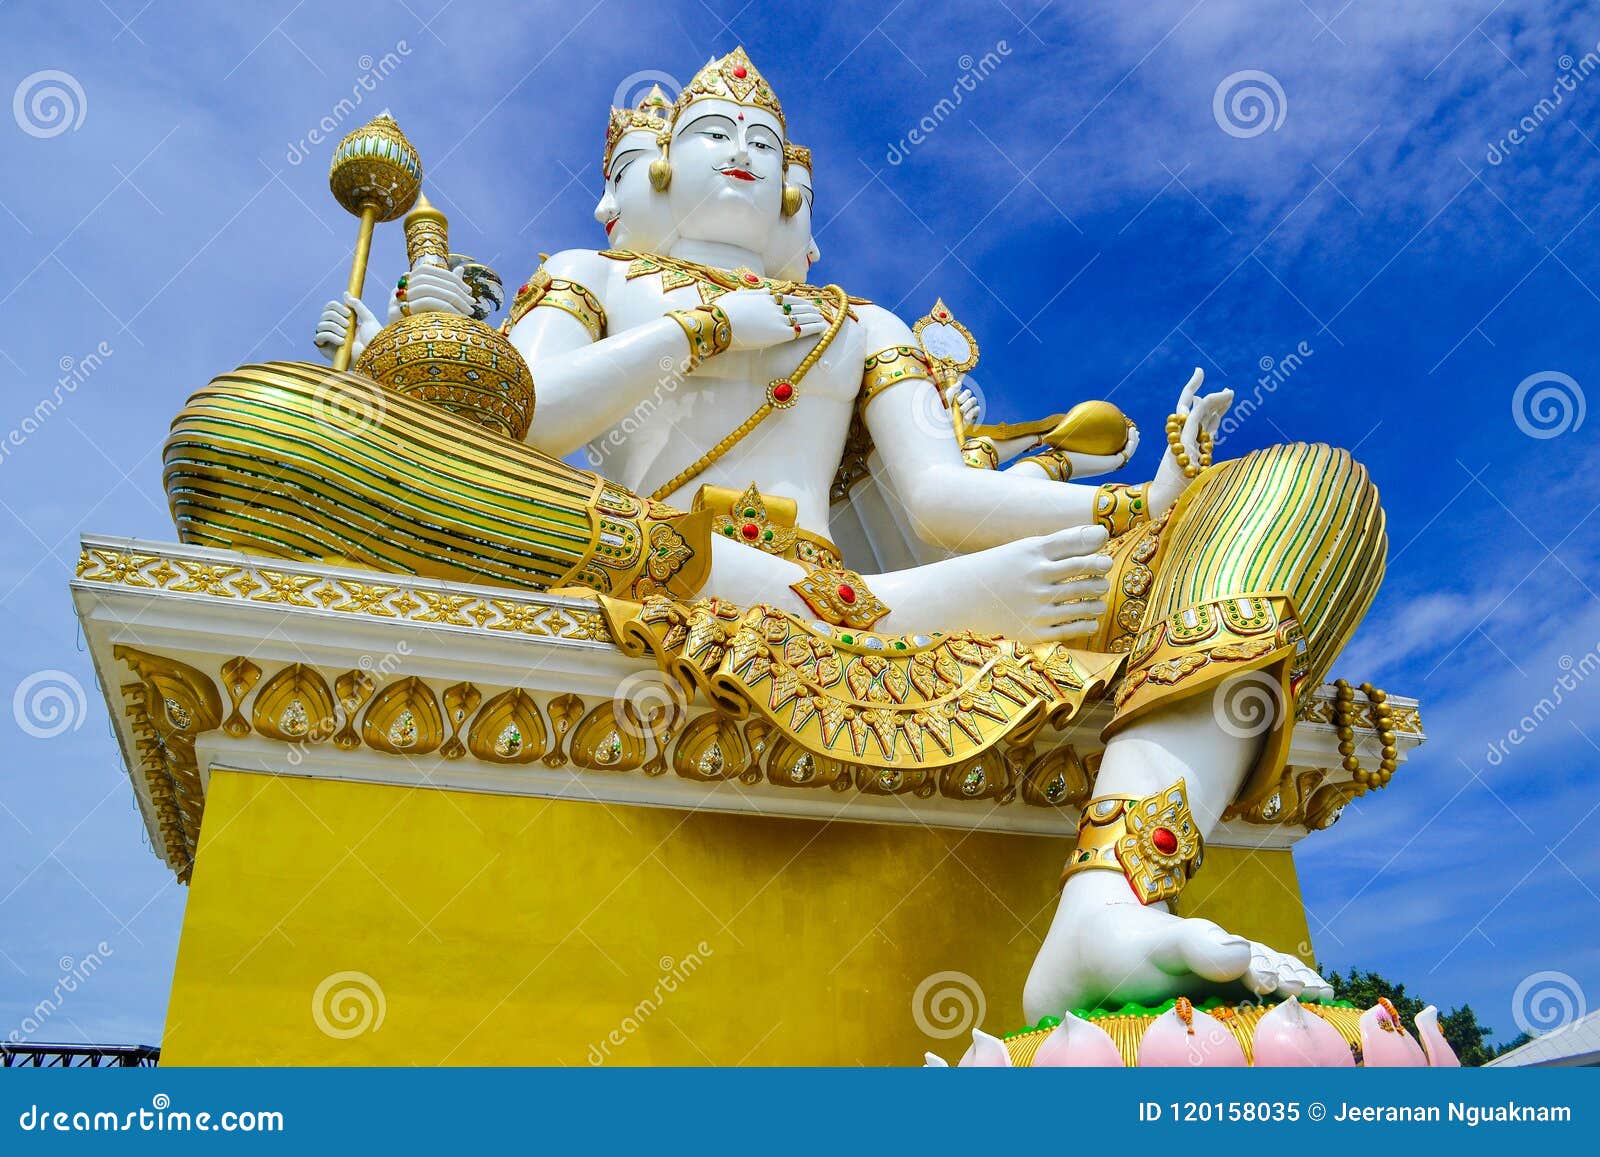 Enormous Brahma Statue with Blue Sky Stock Image - Image of built ...